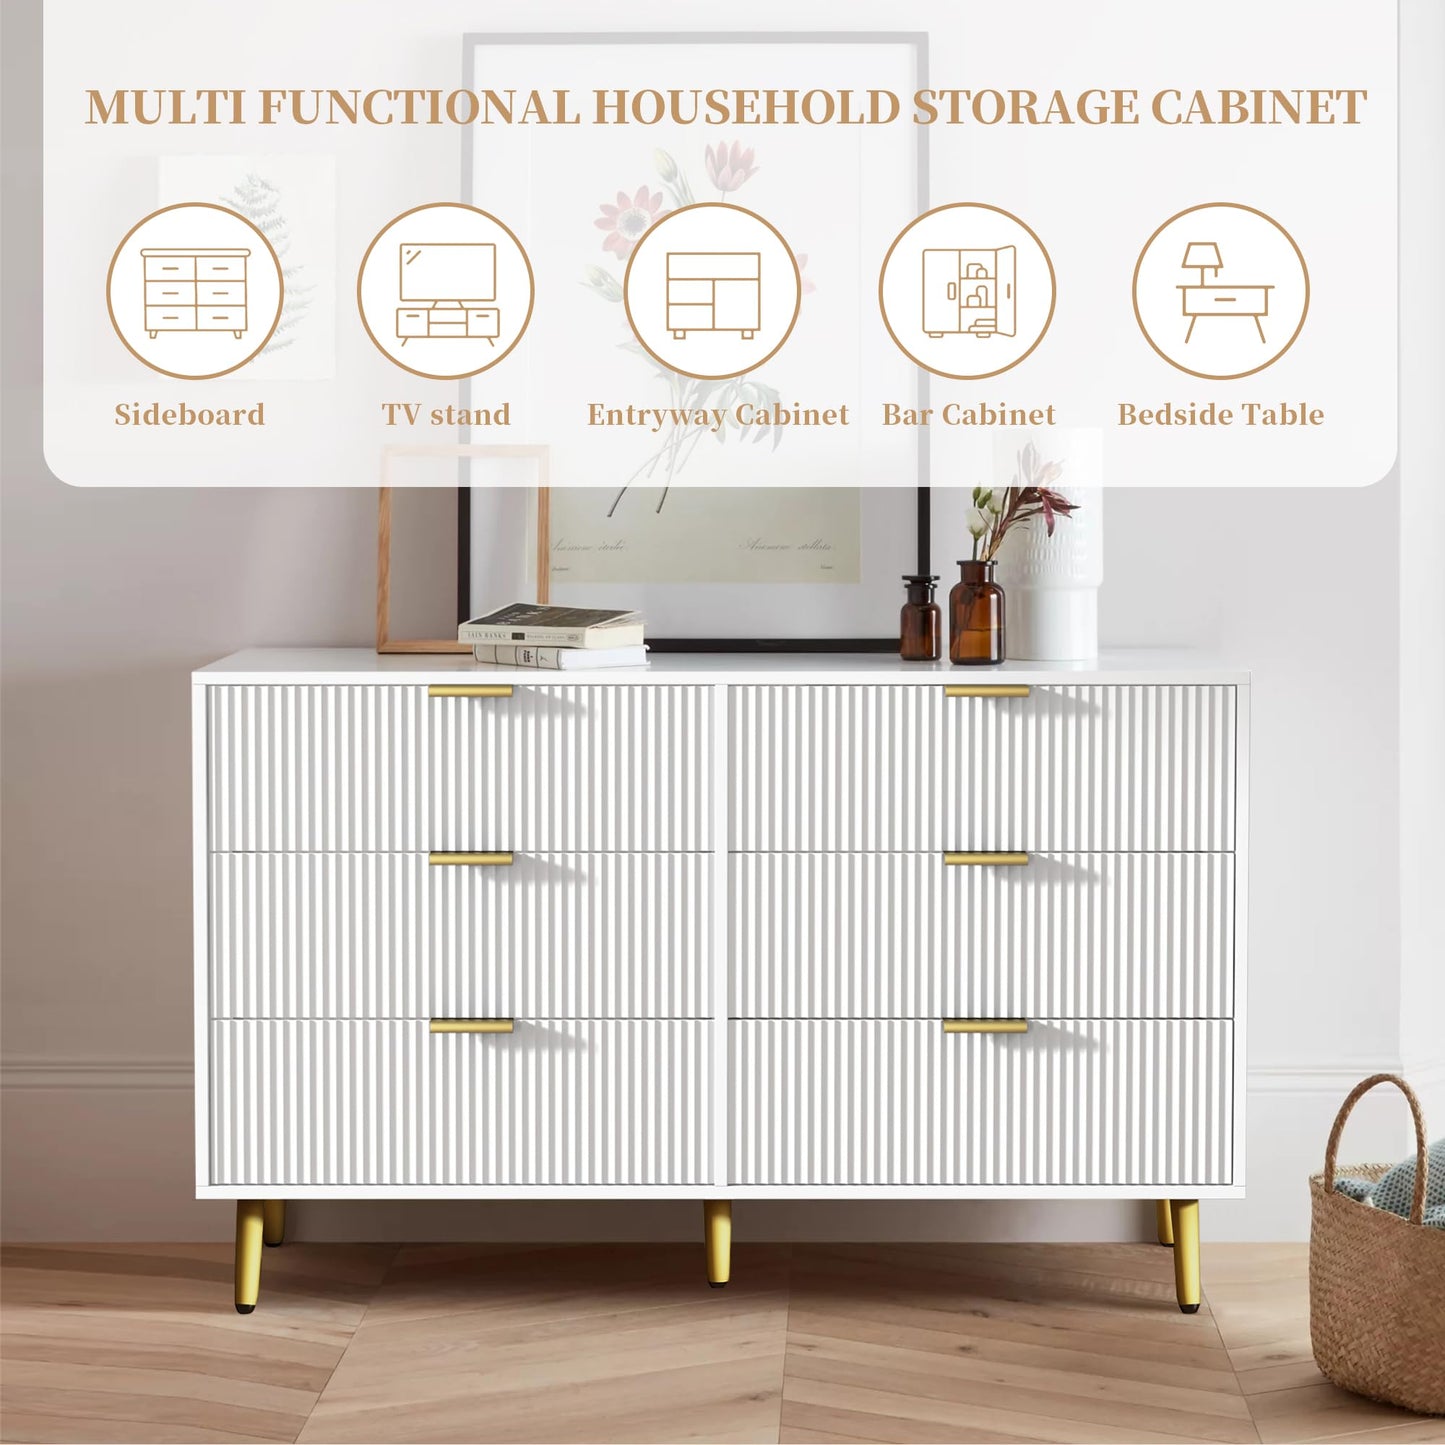 6 Drawer Double Dresser for Bedroom, Modern Dressers Chest of Drawers with Fluted Panel, Wide Wood Storage Dresser Organizer, Dresser TV Stand for